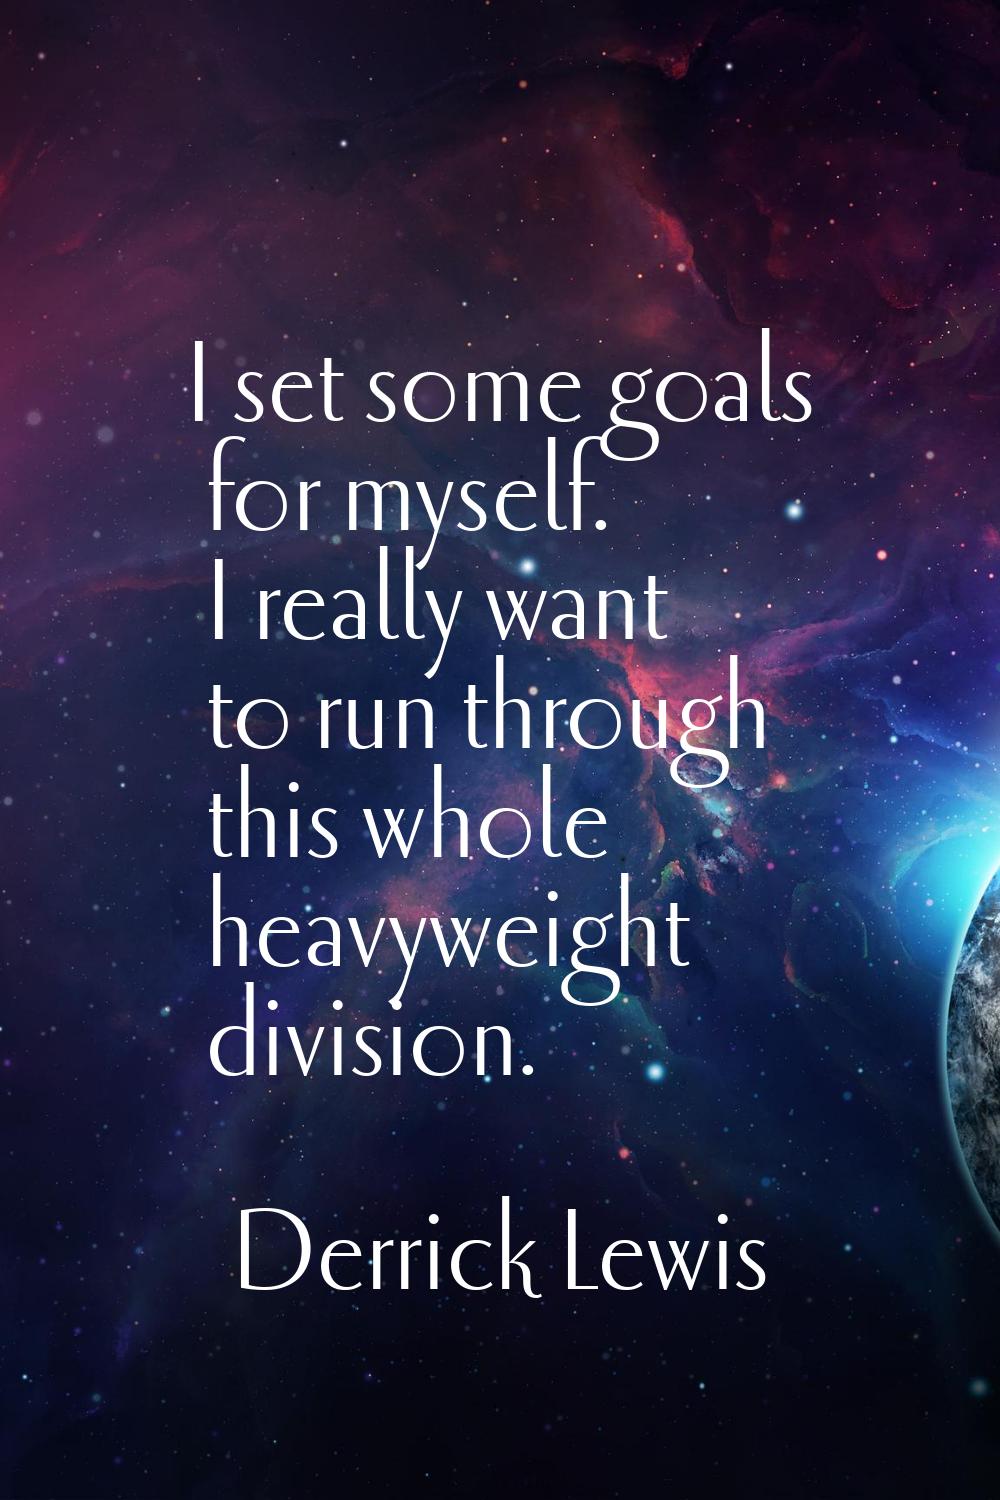 I set some goals for myself. I really want to run through this whole heavyweight division.